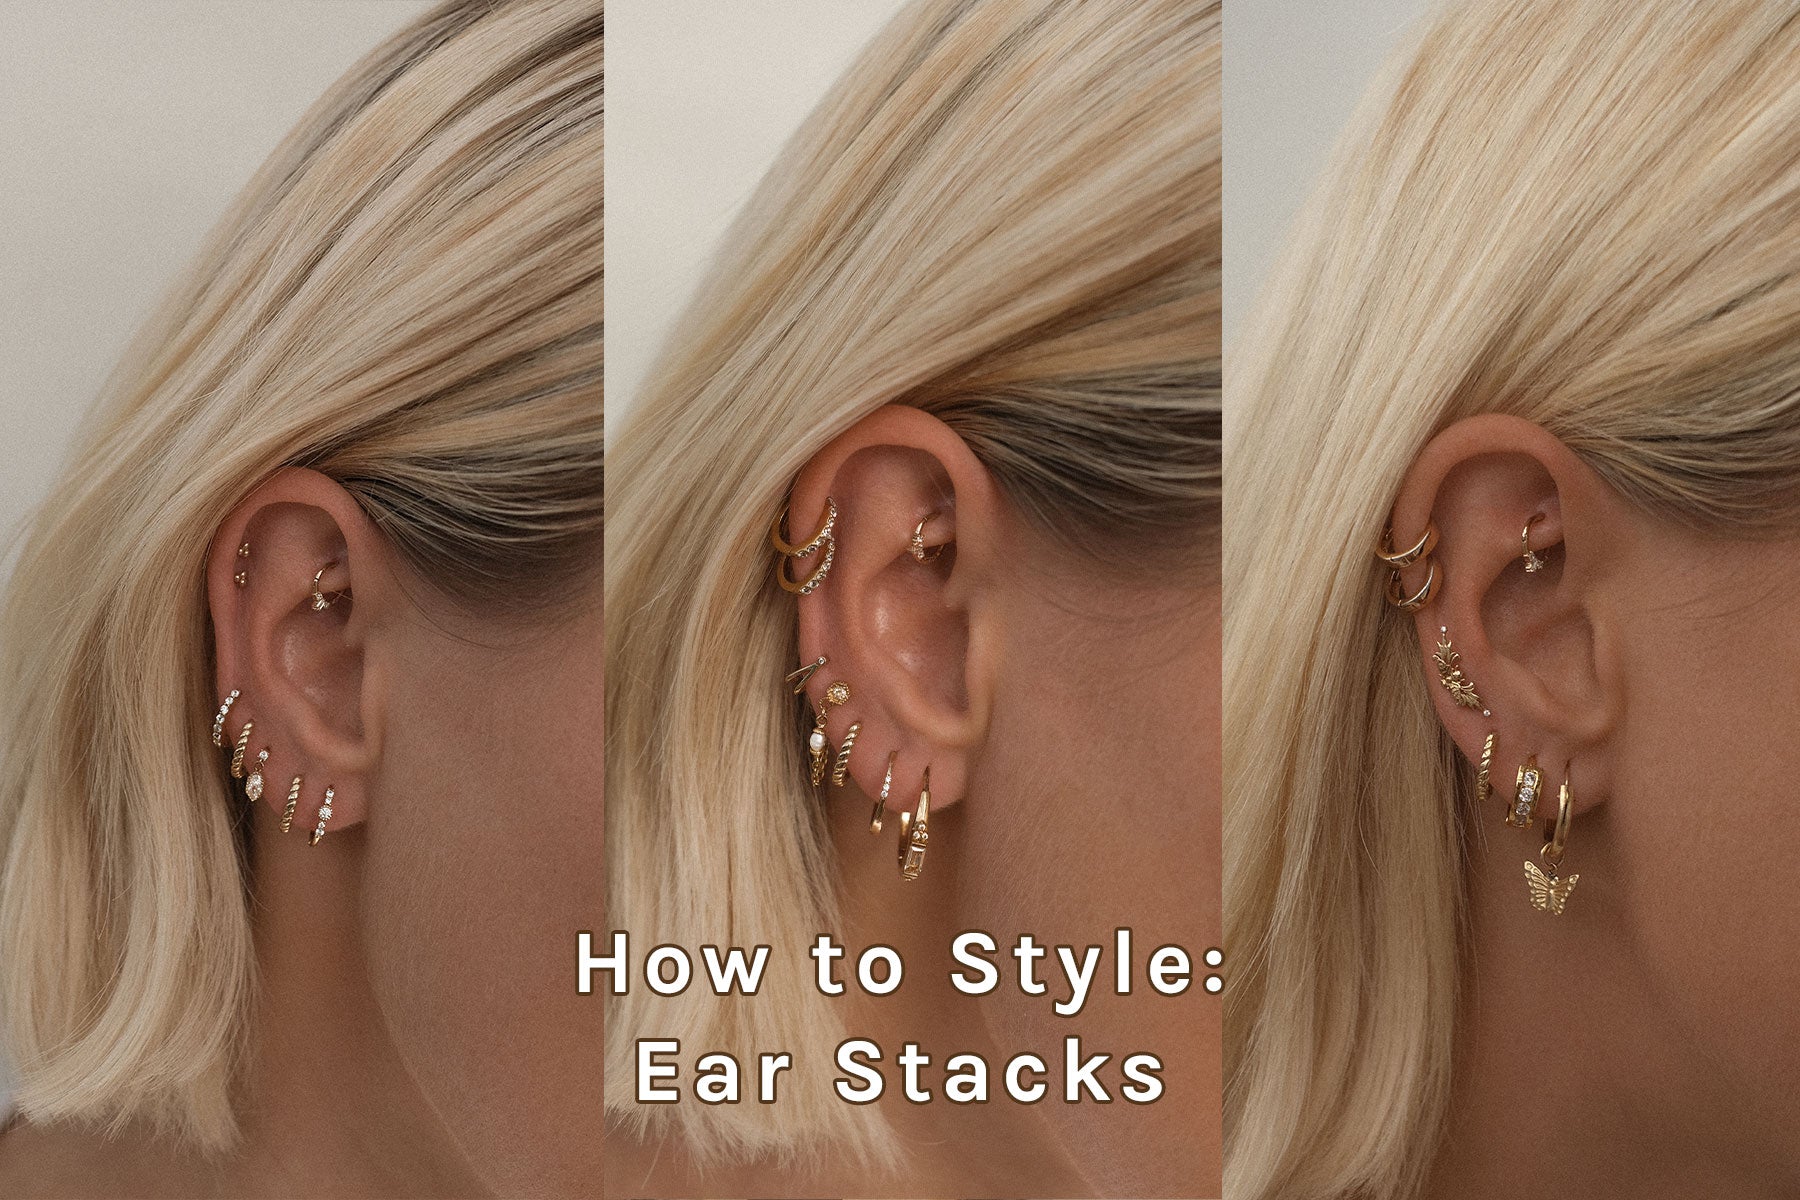 How to Style: Ear Stacks